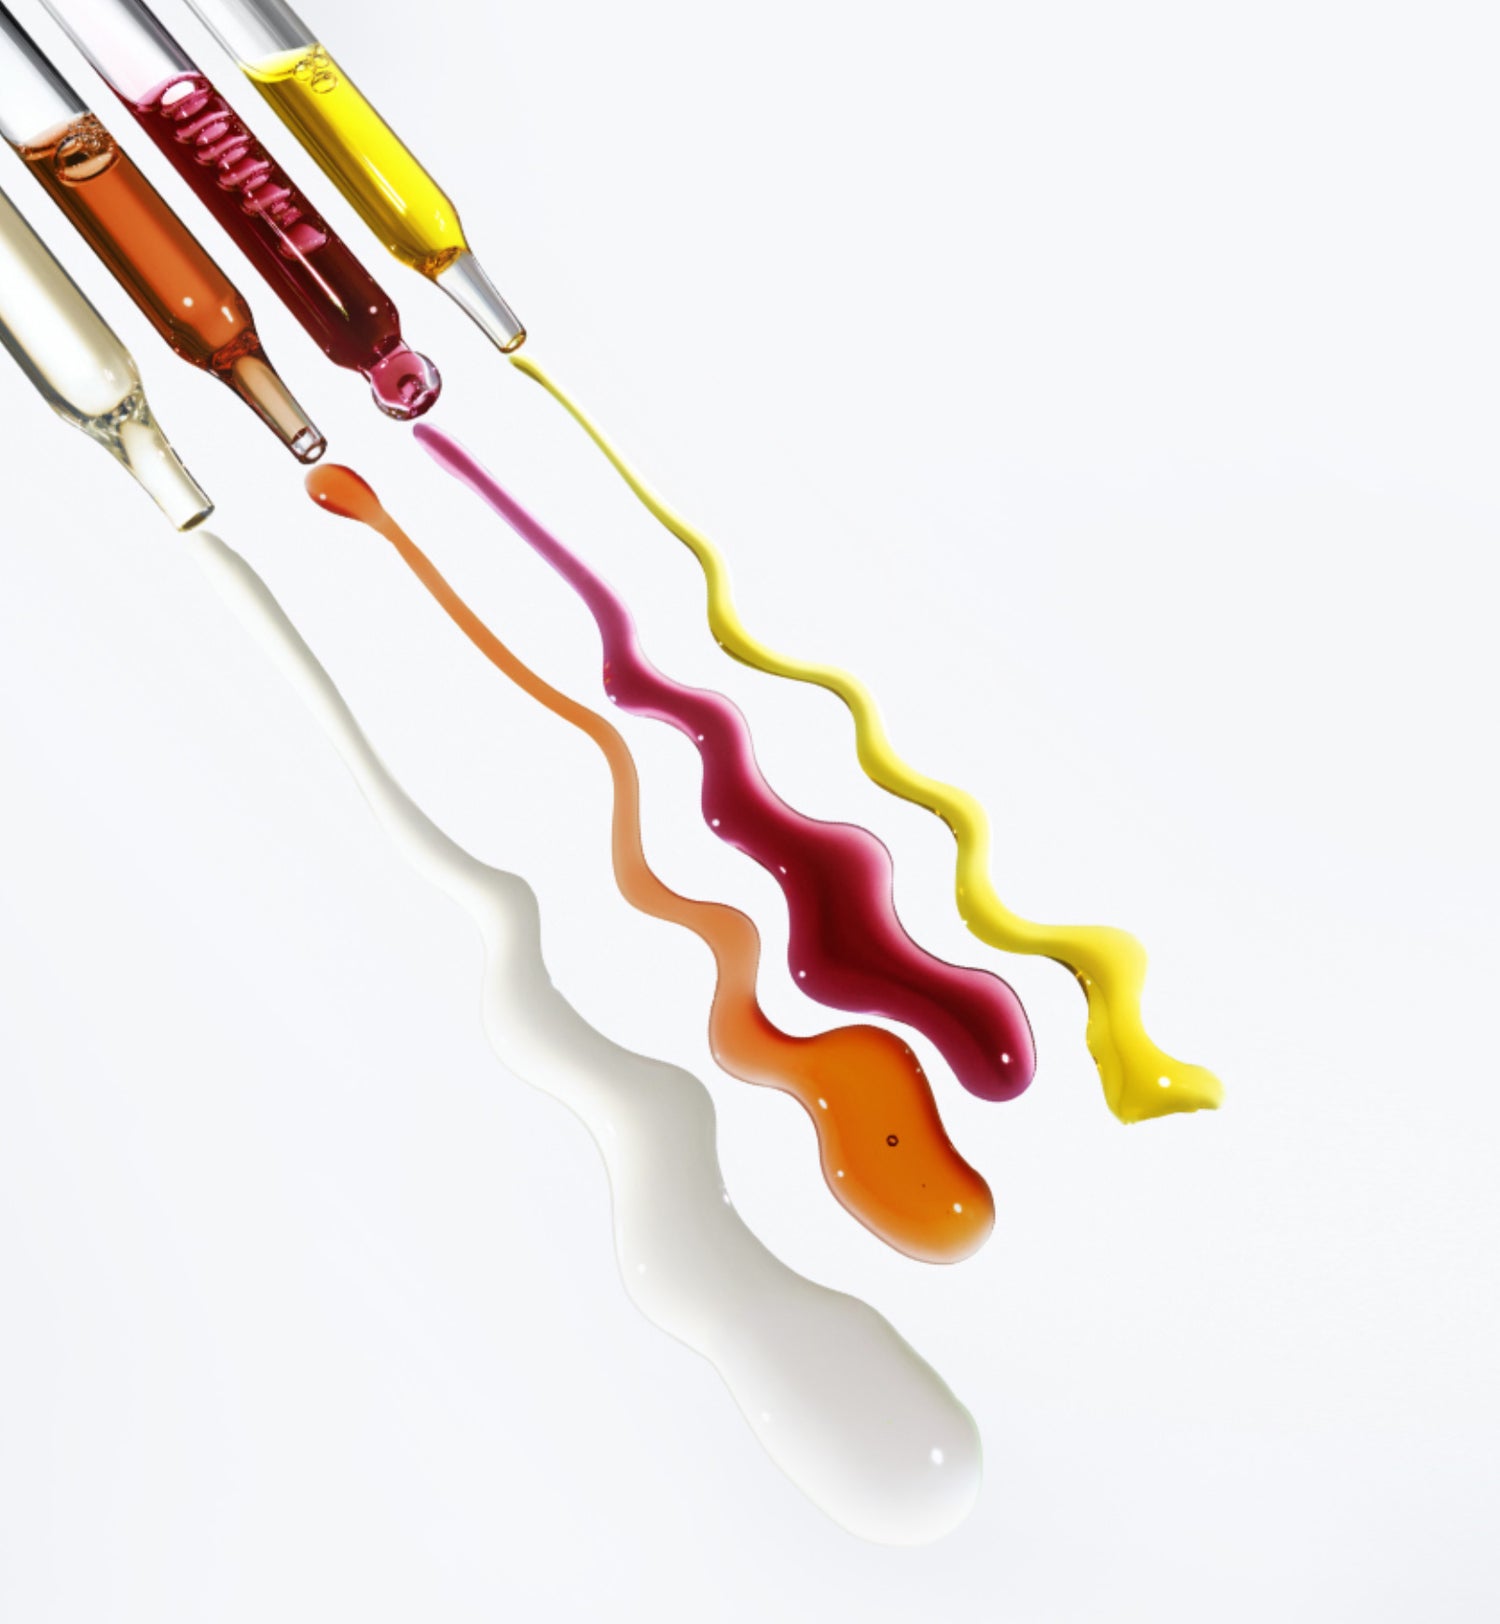 4 pipettes with different color liquids